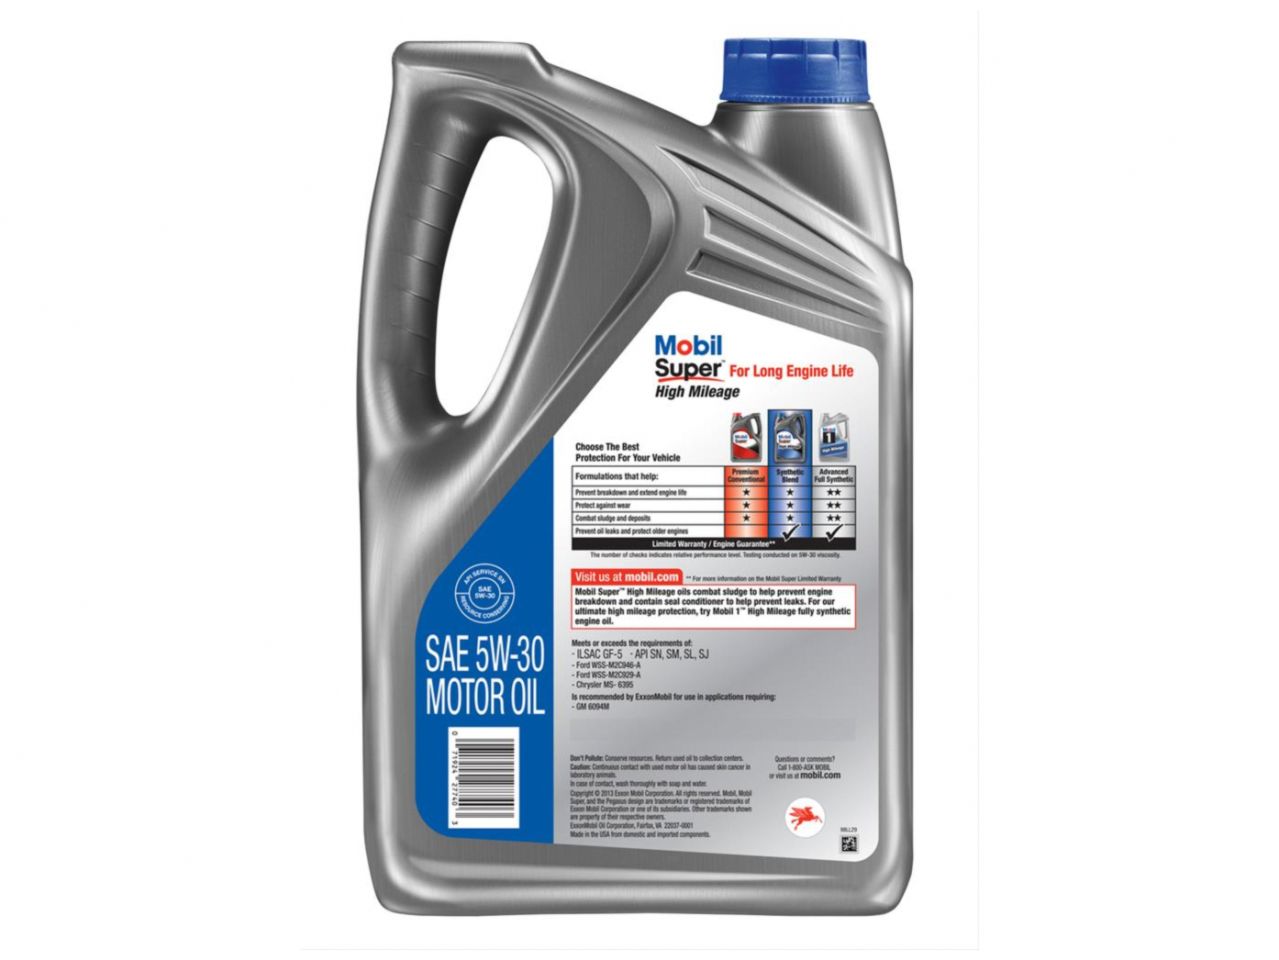 Mobil Motor Oil, Super High Mileage, Mineral, 5W30, 5 Qts., Each